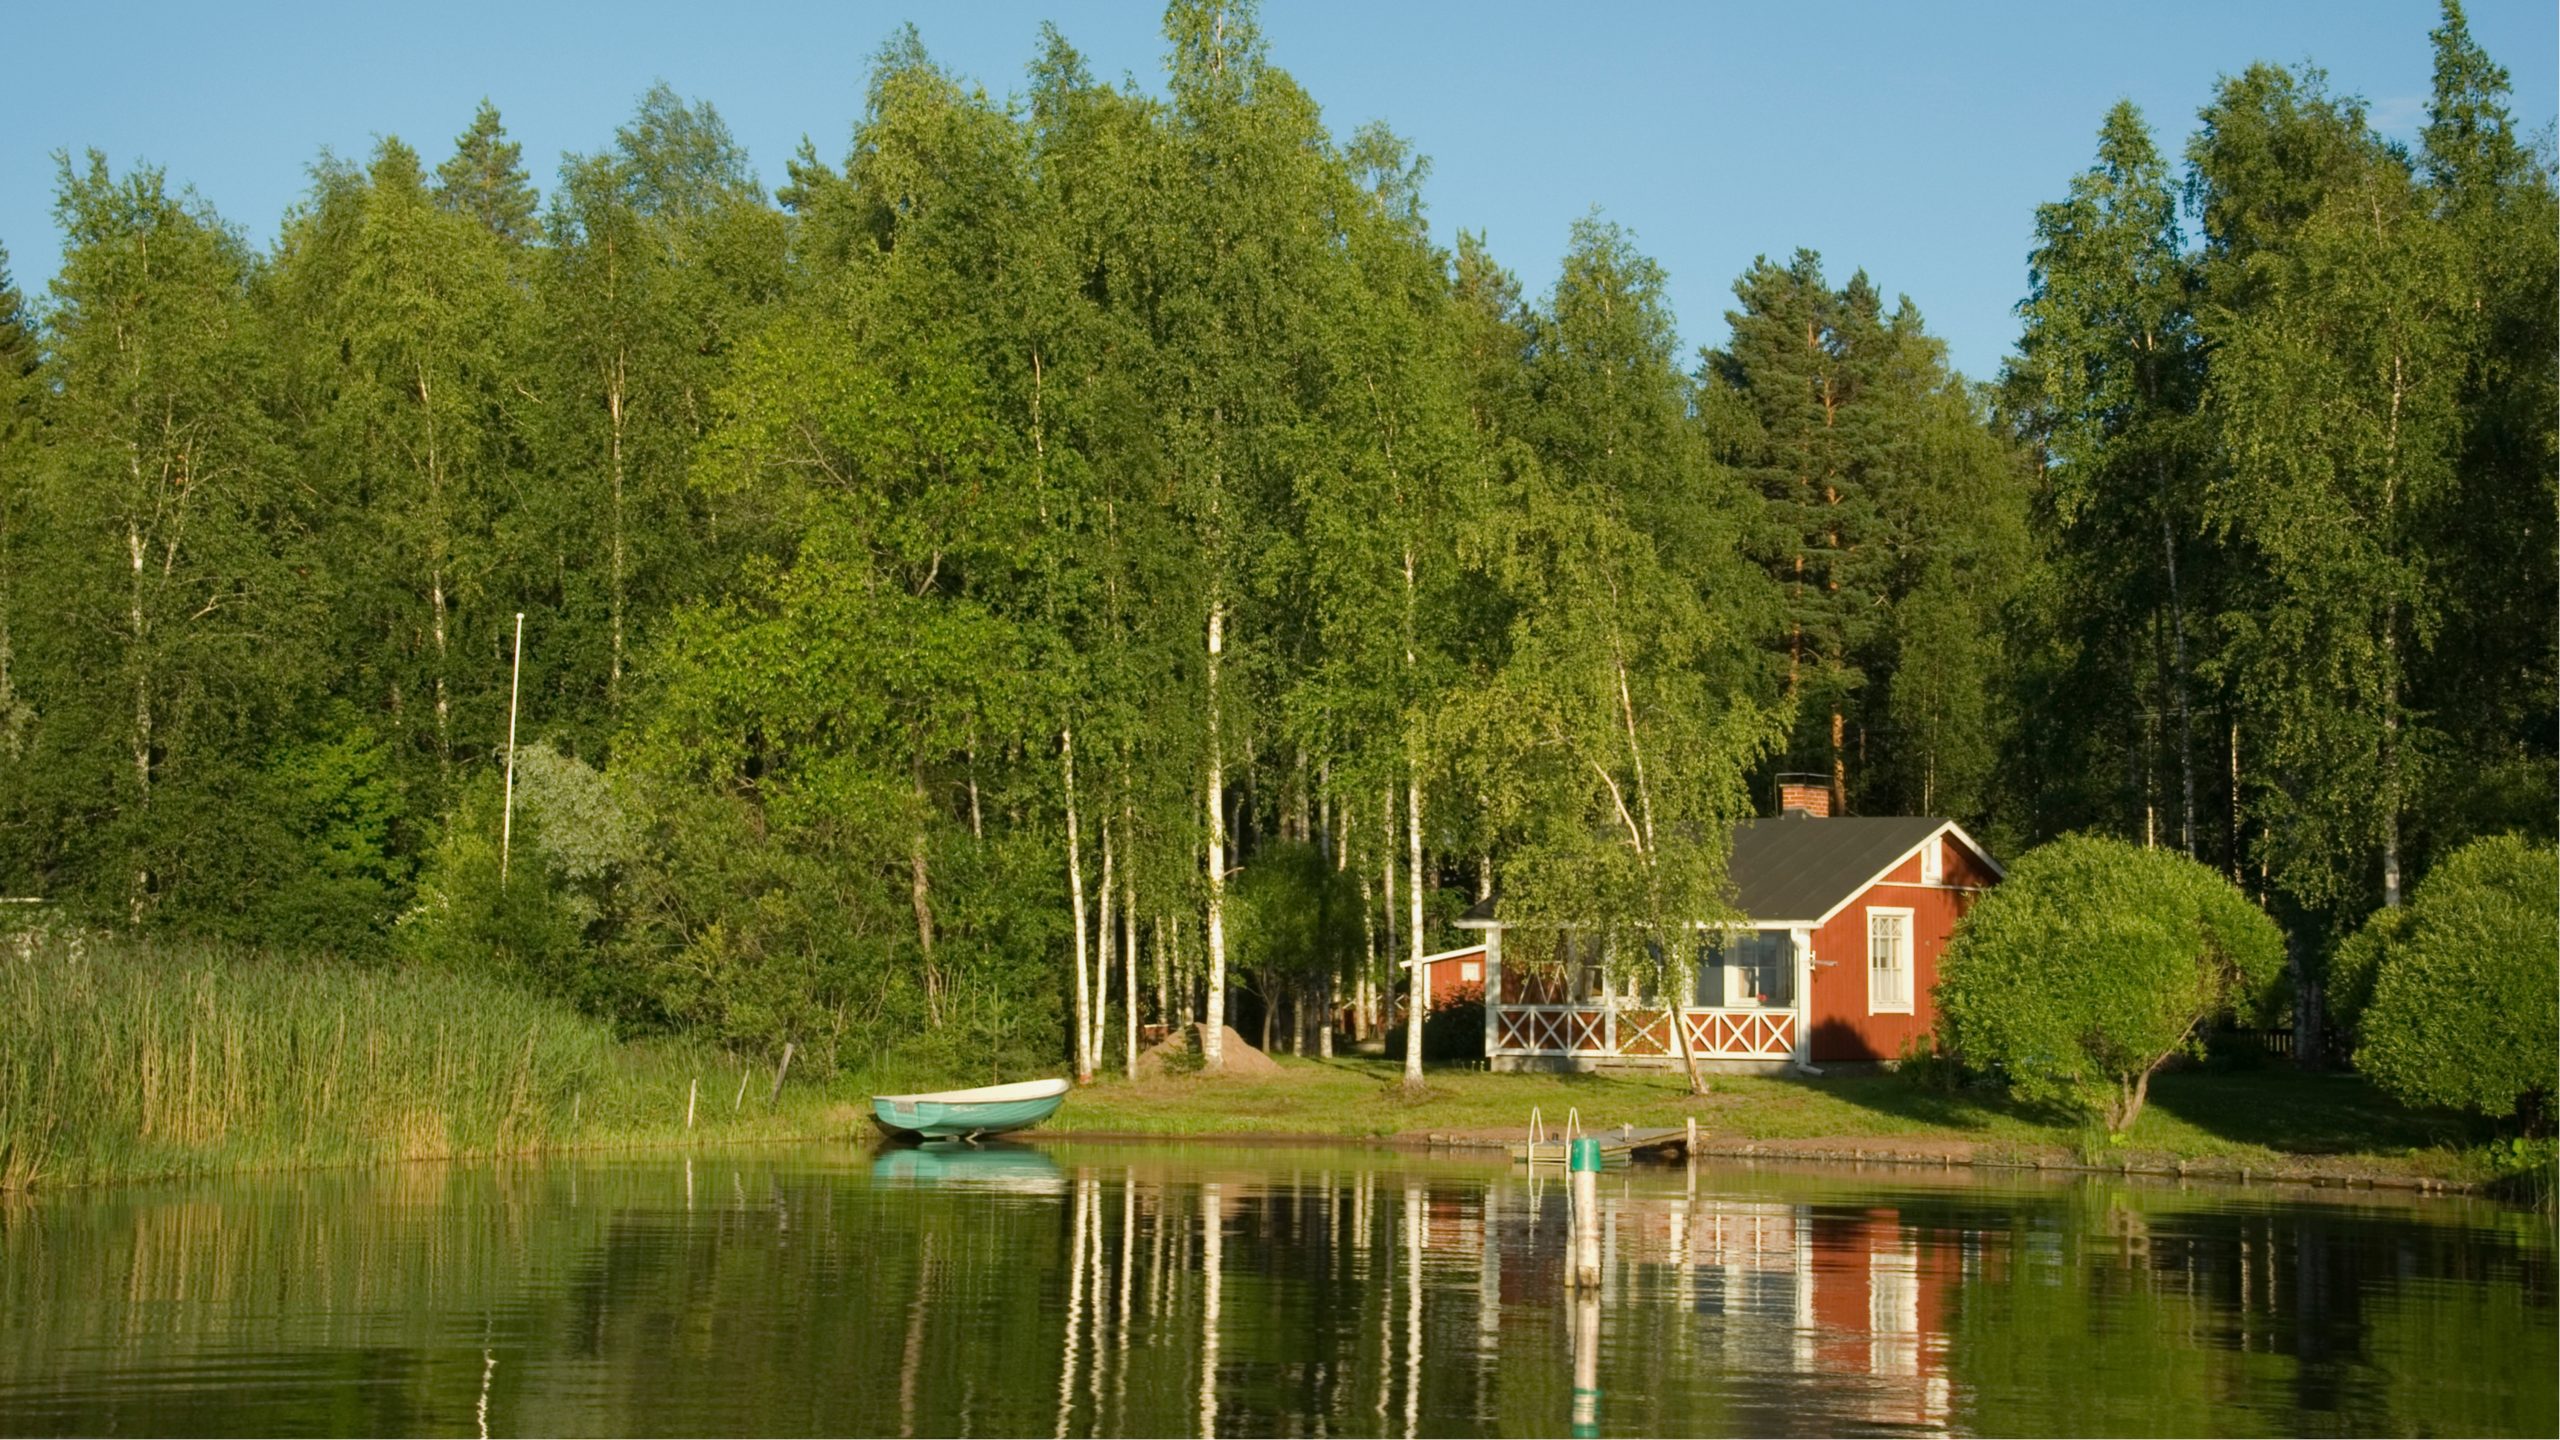 Finland Bus Charter in summer trip - experience Summer Cottage